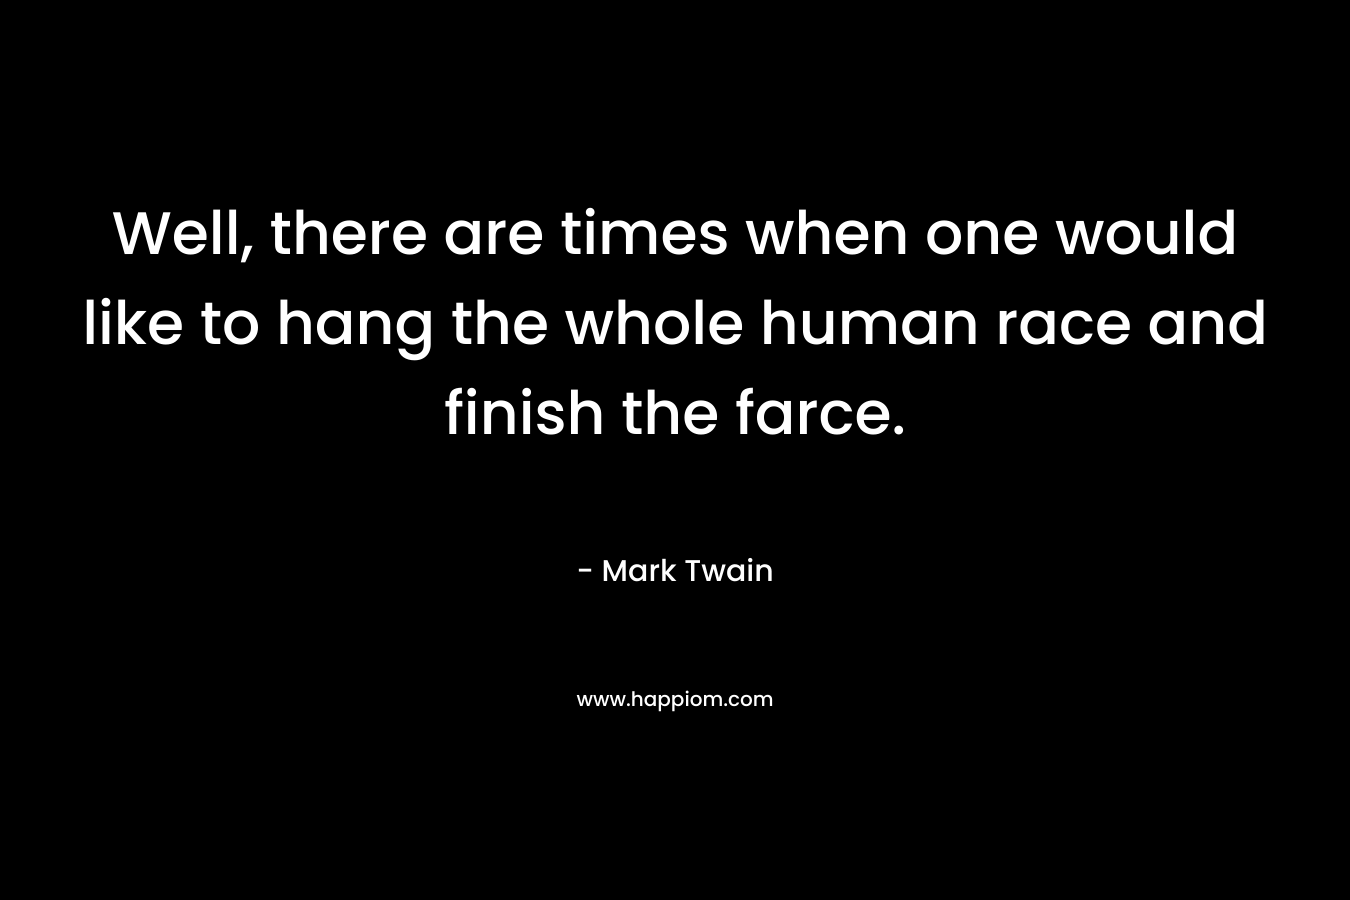 Well, there are times when one would like to hang the whole human race and finish the farce.